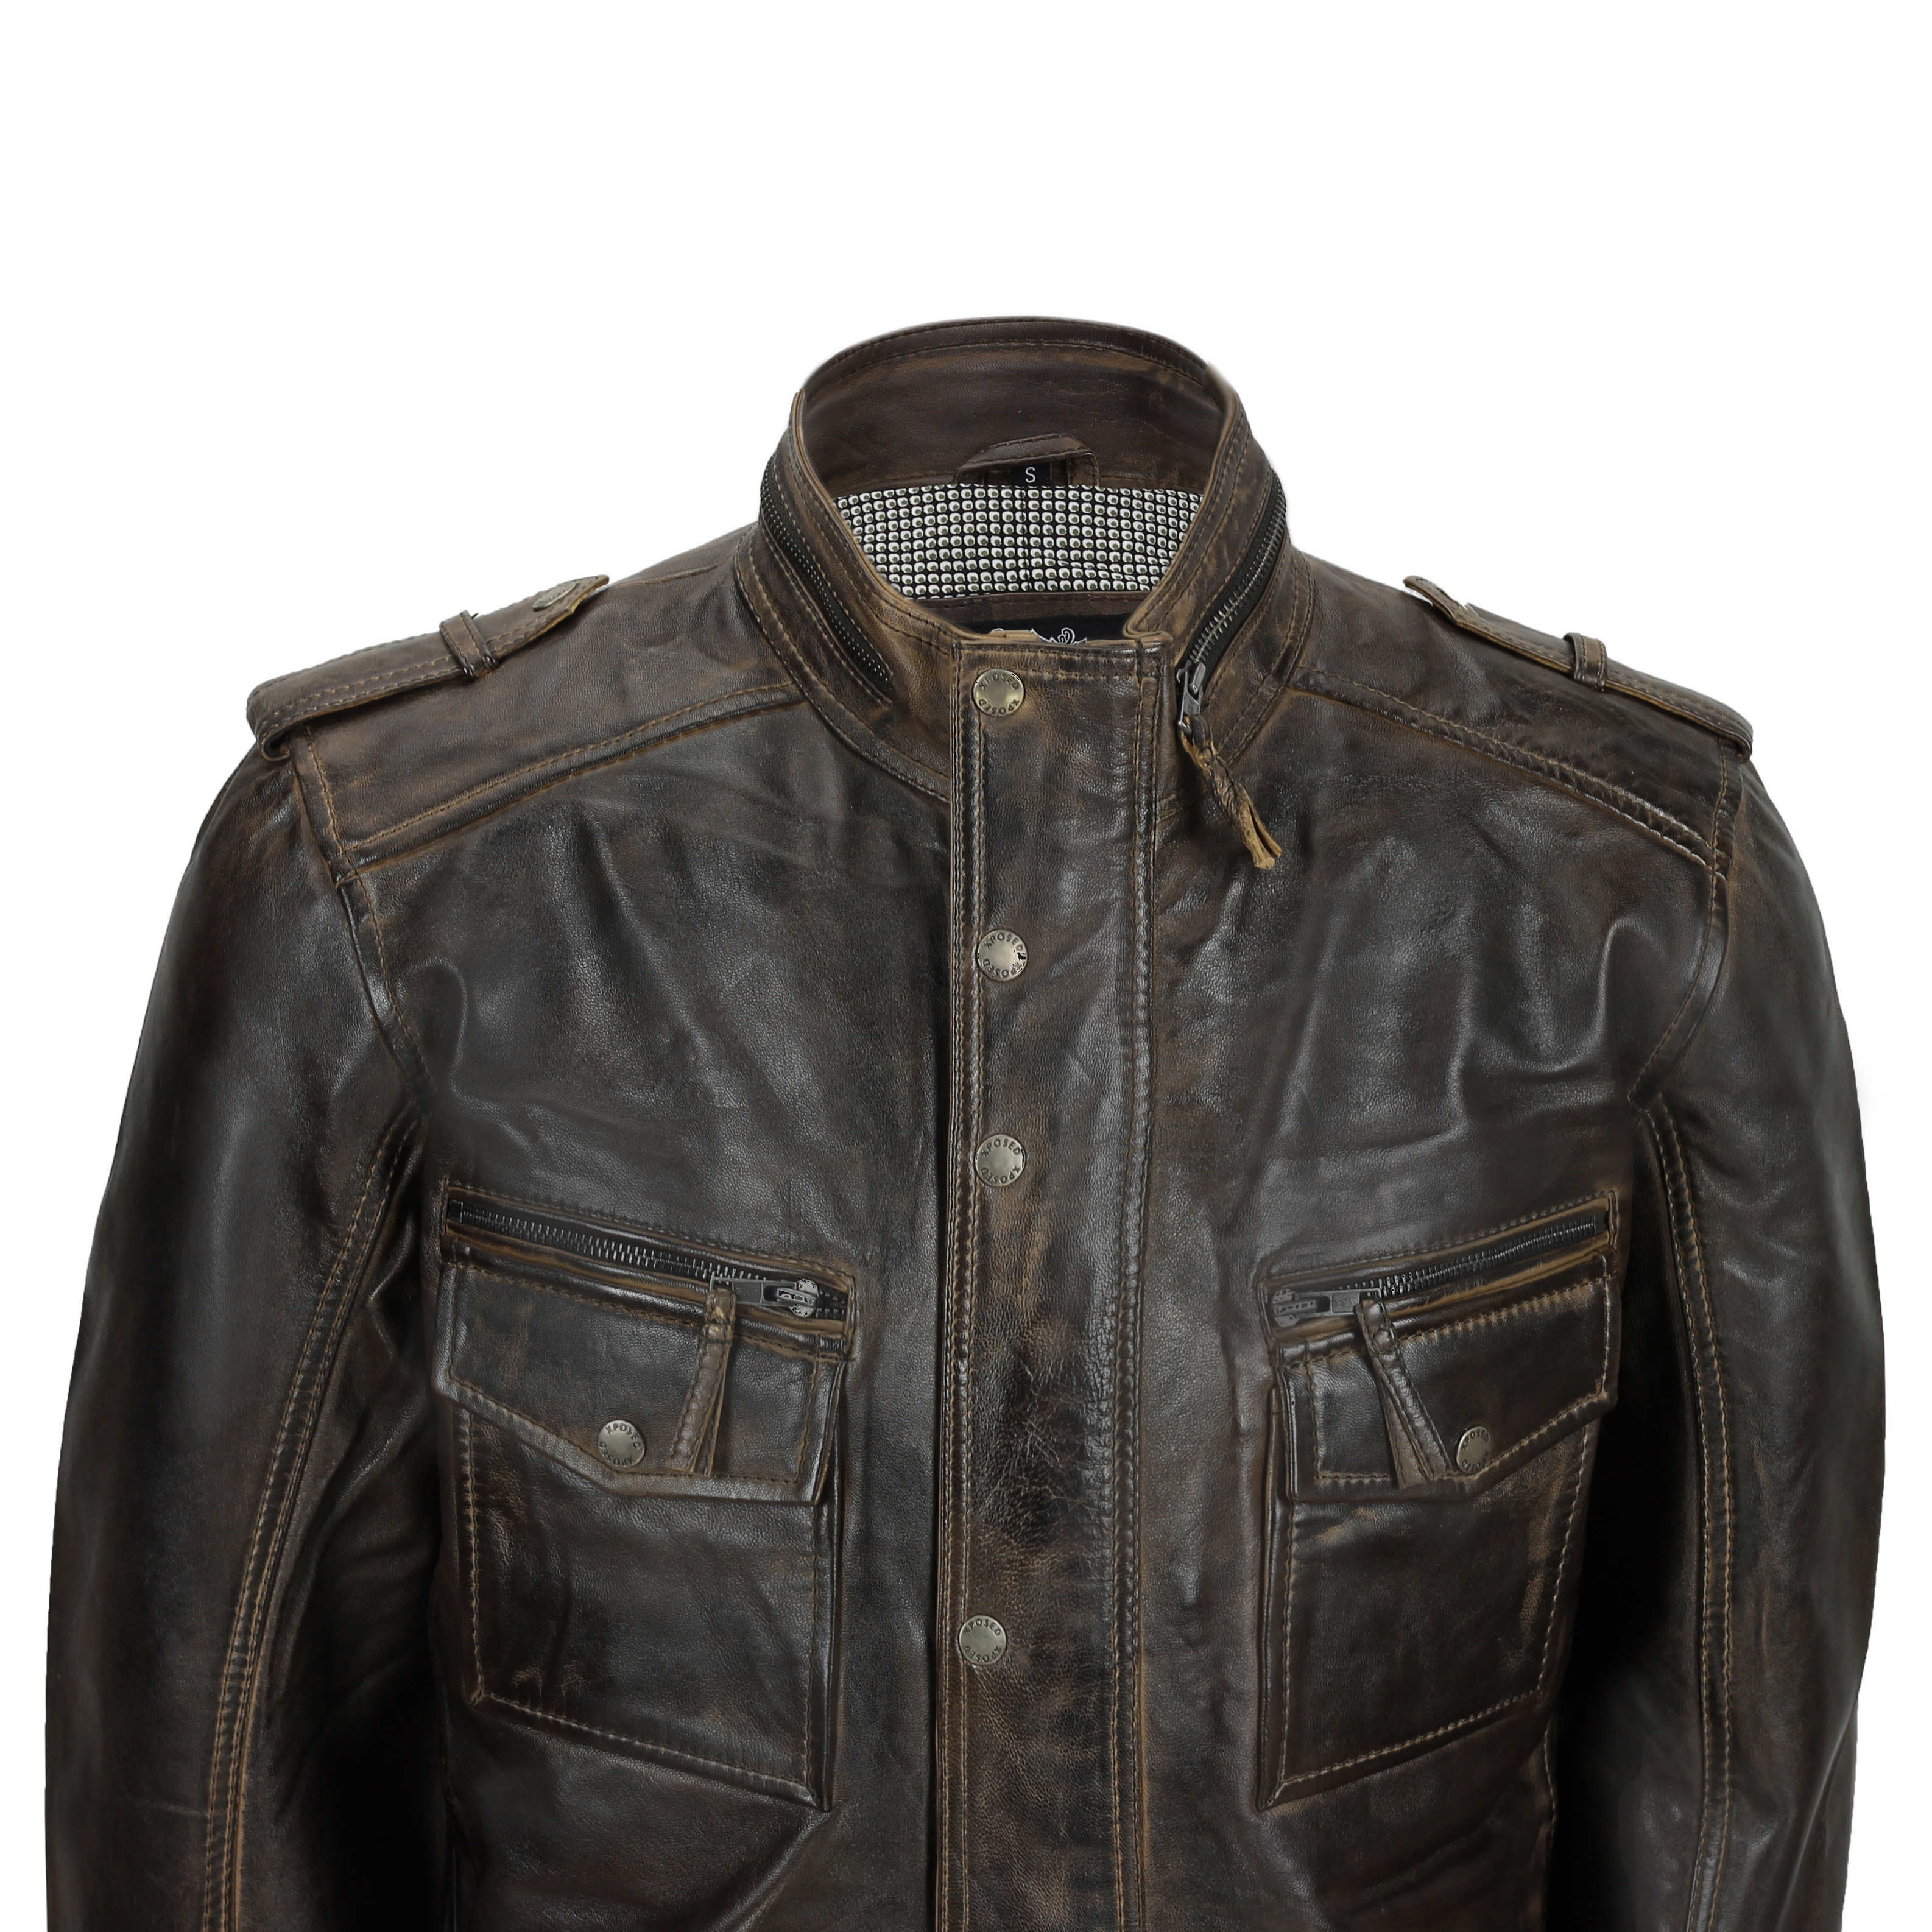 XPOSED Mens Real Leather Vintage Smart Casual Brown Military Style Field Jacket 